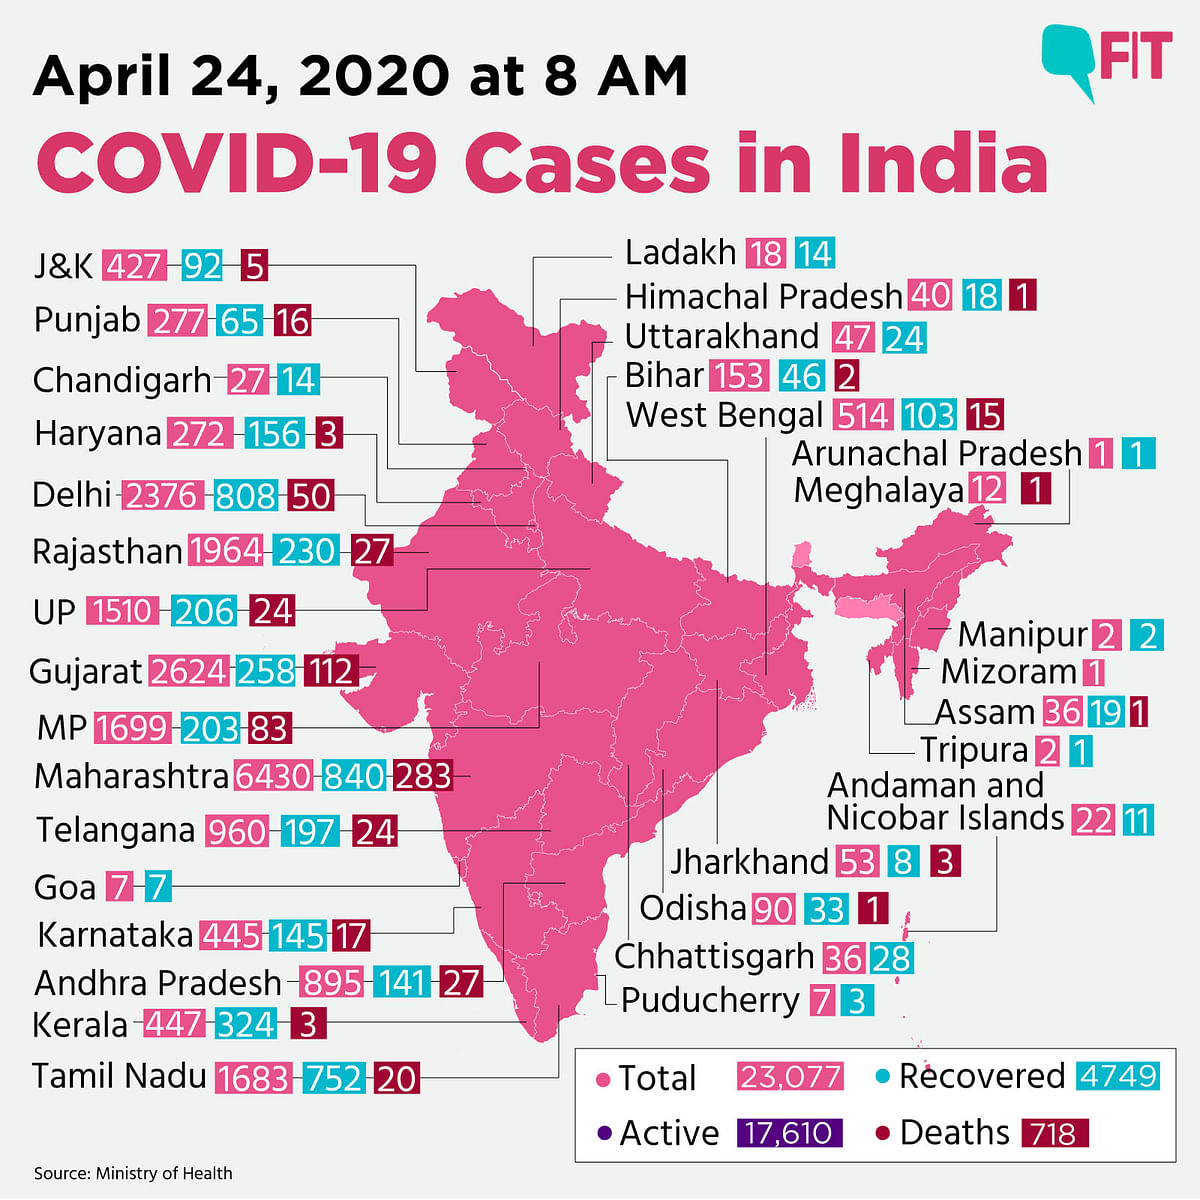 COVID-19 India Update: Cases Climb to 23,077, Deaths at 718